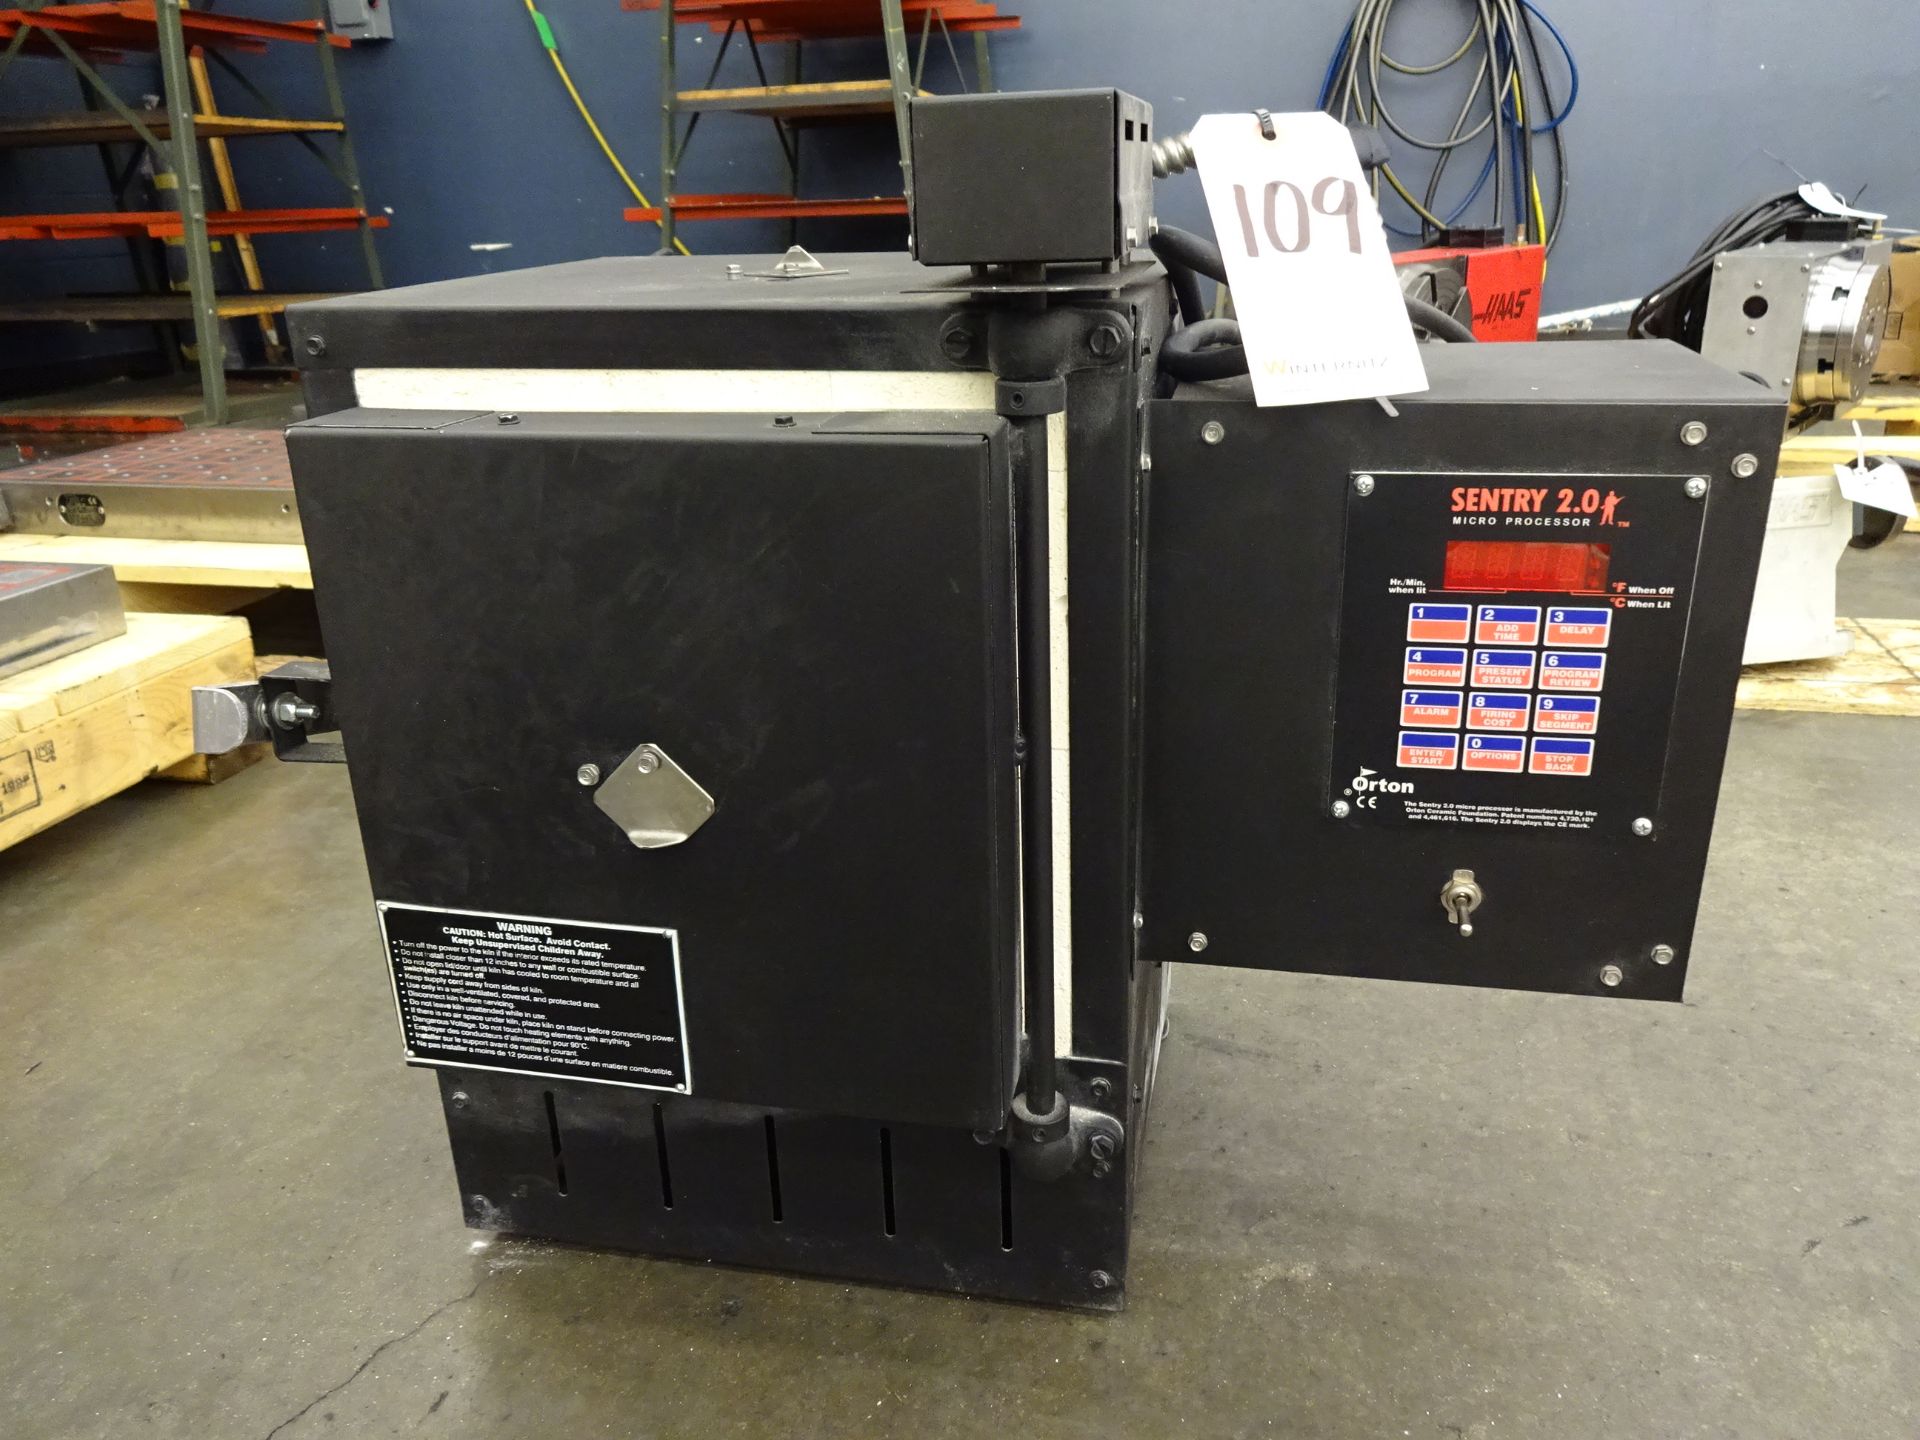 ORTON BENCH TOP FURNACE WITH SENTRY 2.0 MICROPROCESSOR CONTROLS, 8 X 8 X 8 (APPROX) CAP.